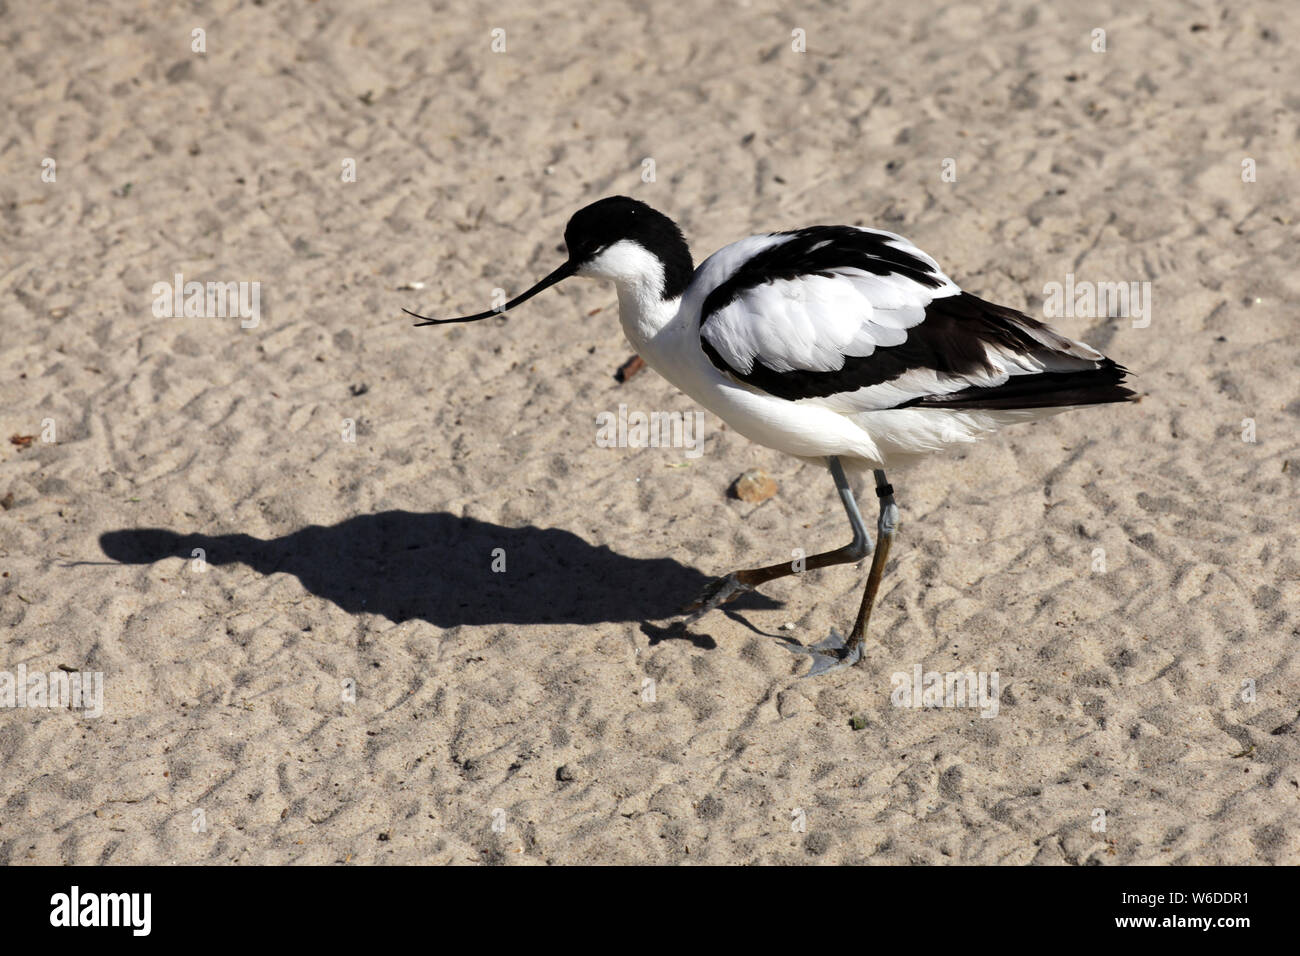 A pied avocet in strong sun. Striking and essentially unmistakable, with elegant shape, boldly pied plumage, long bluish-gray legs, and long, slender, Stock Photo